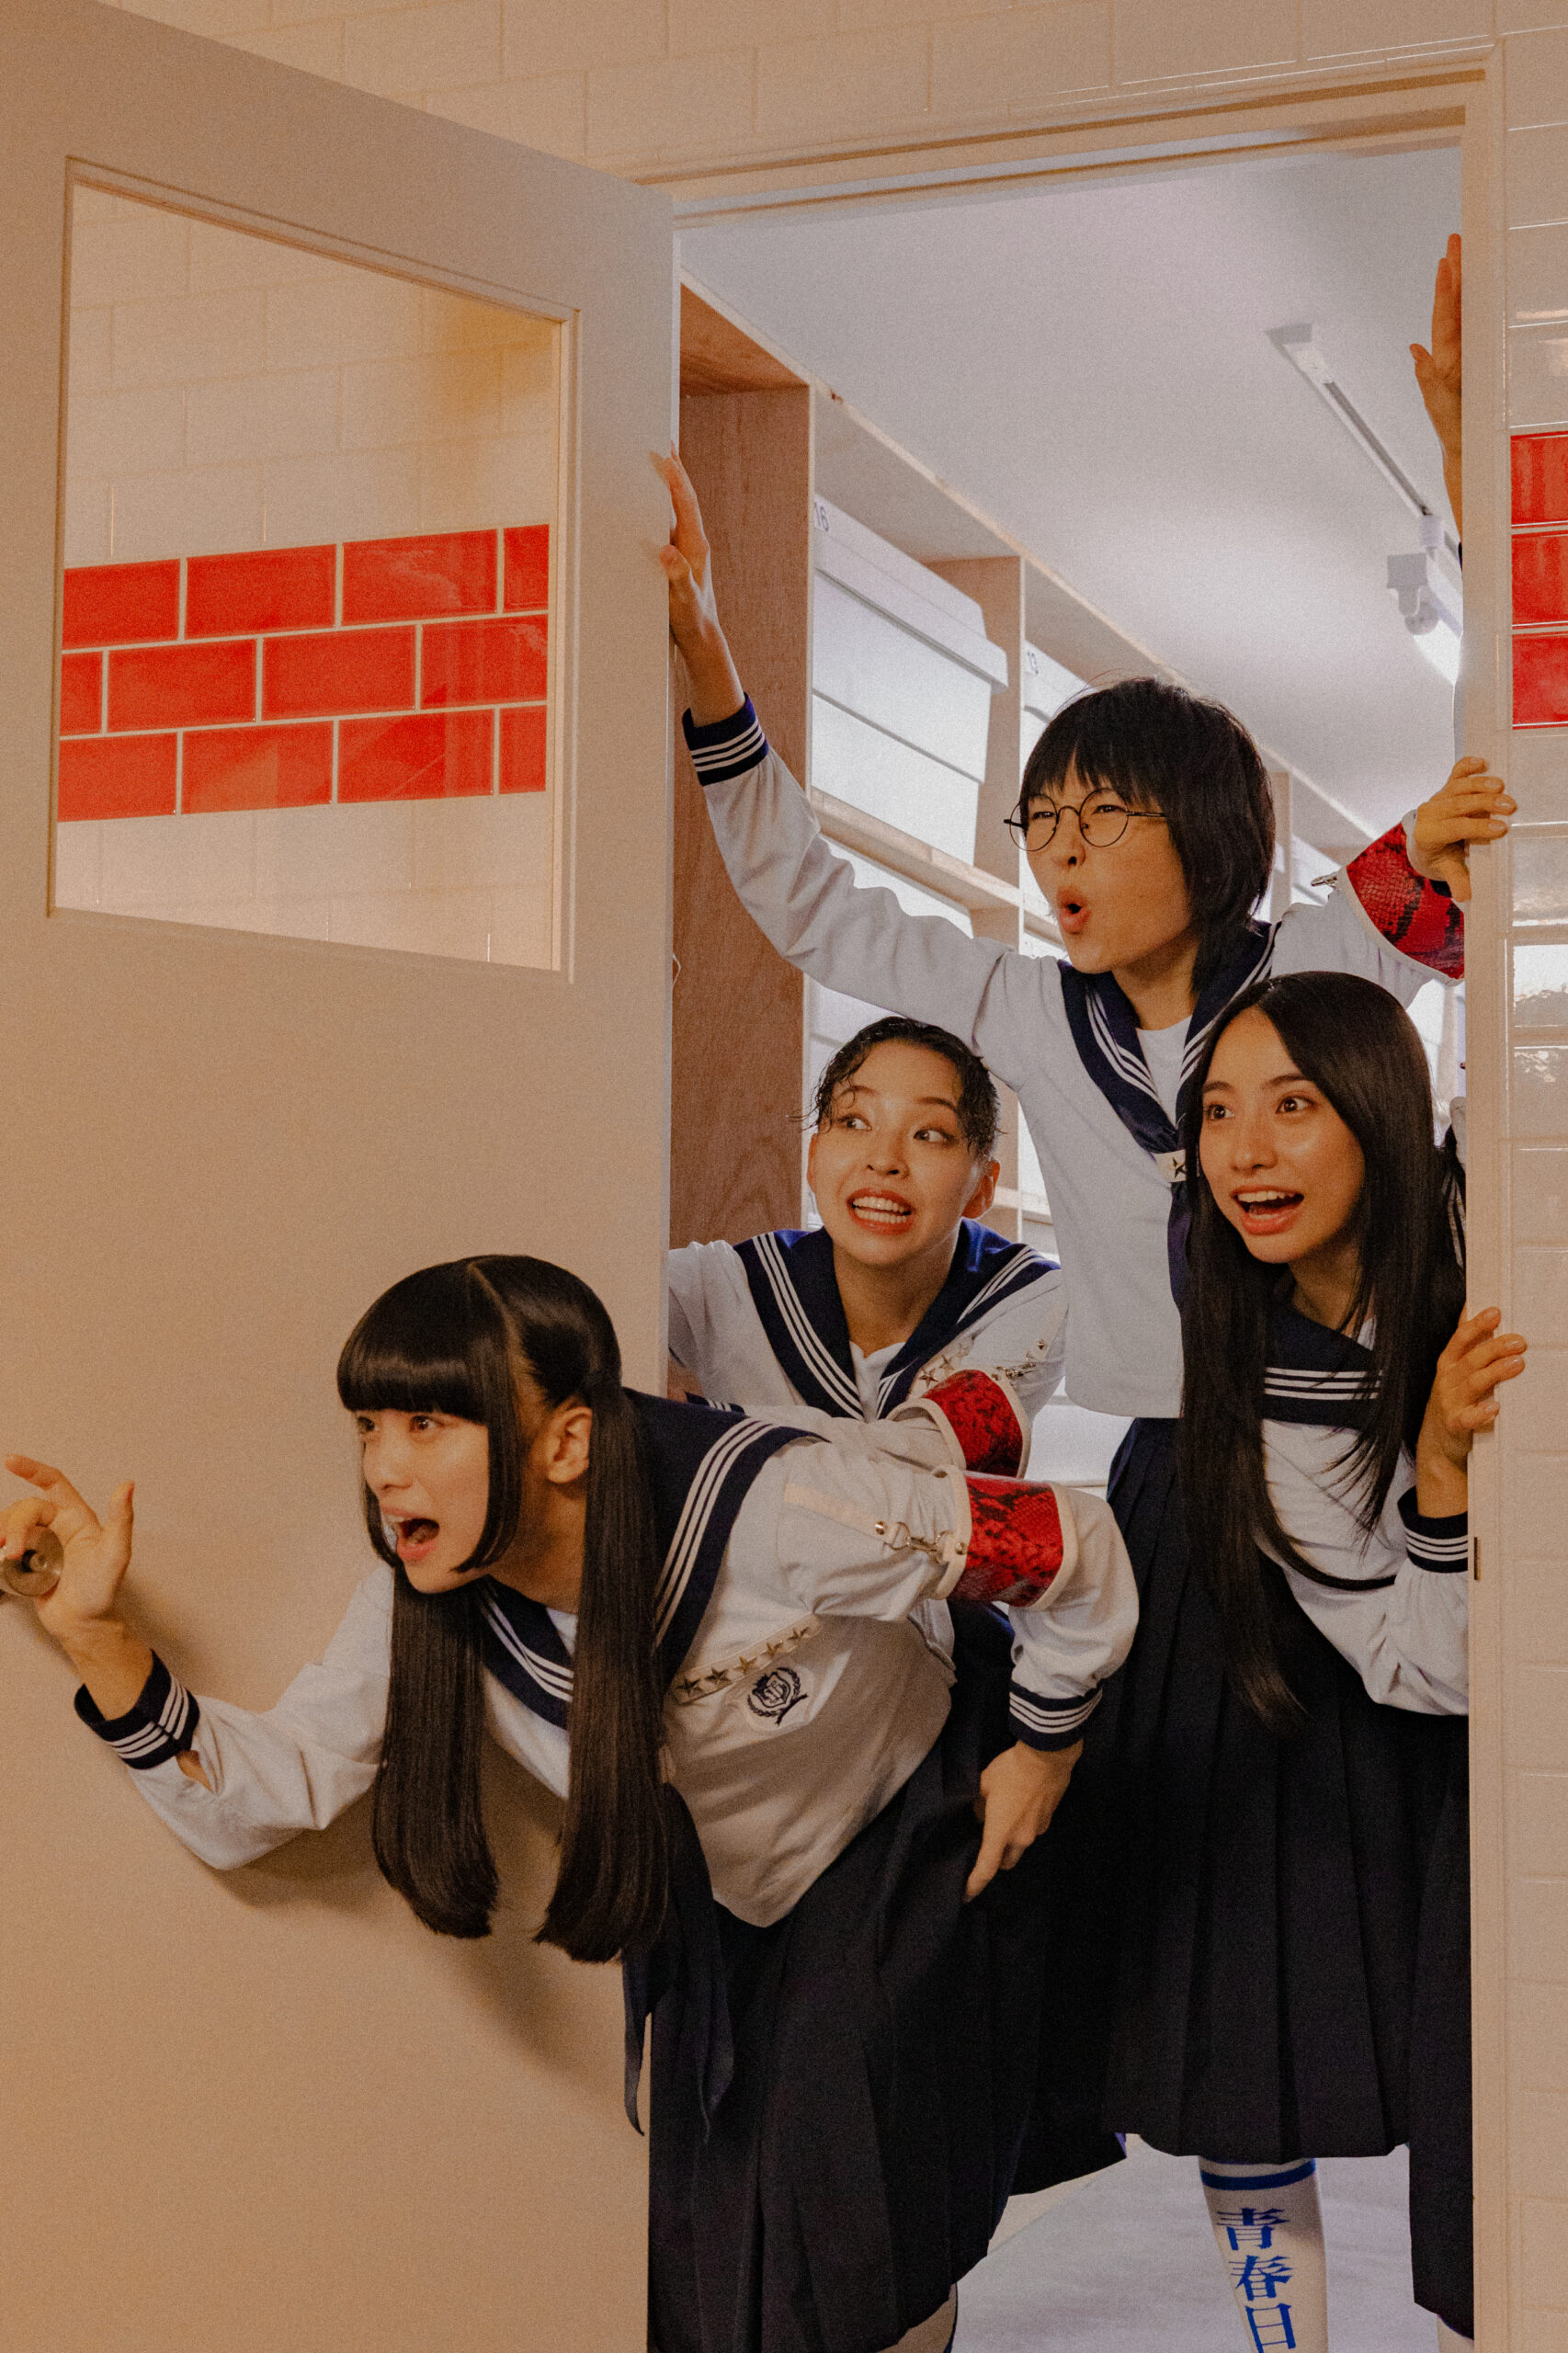 A group of girls in uniforms